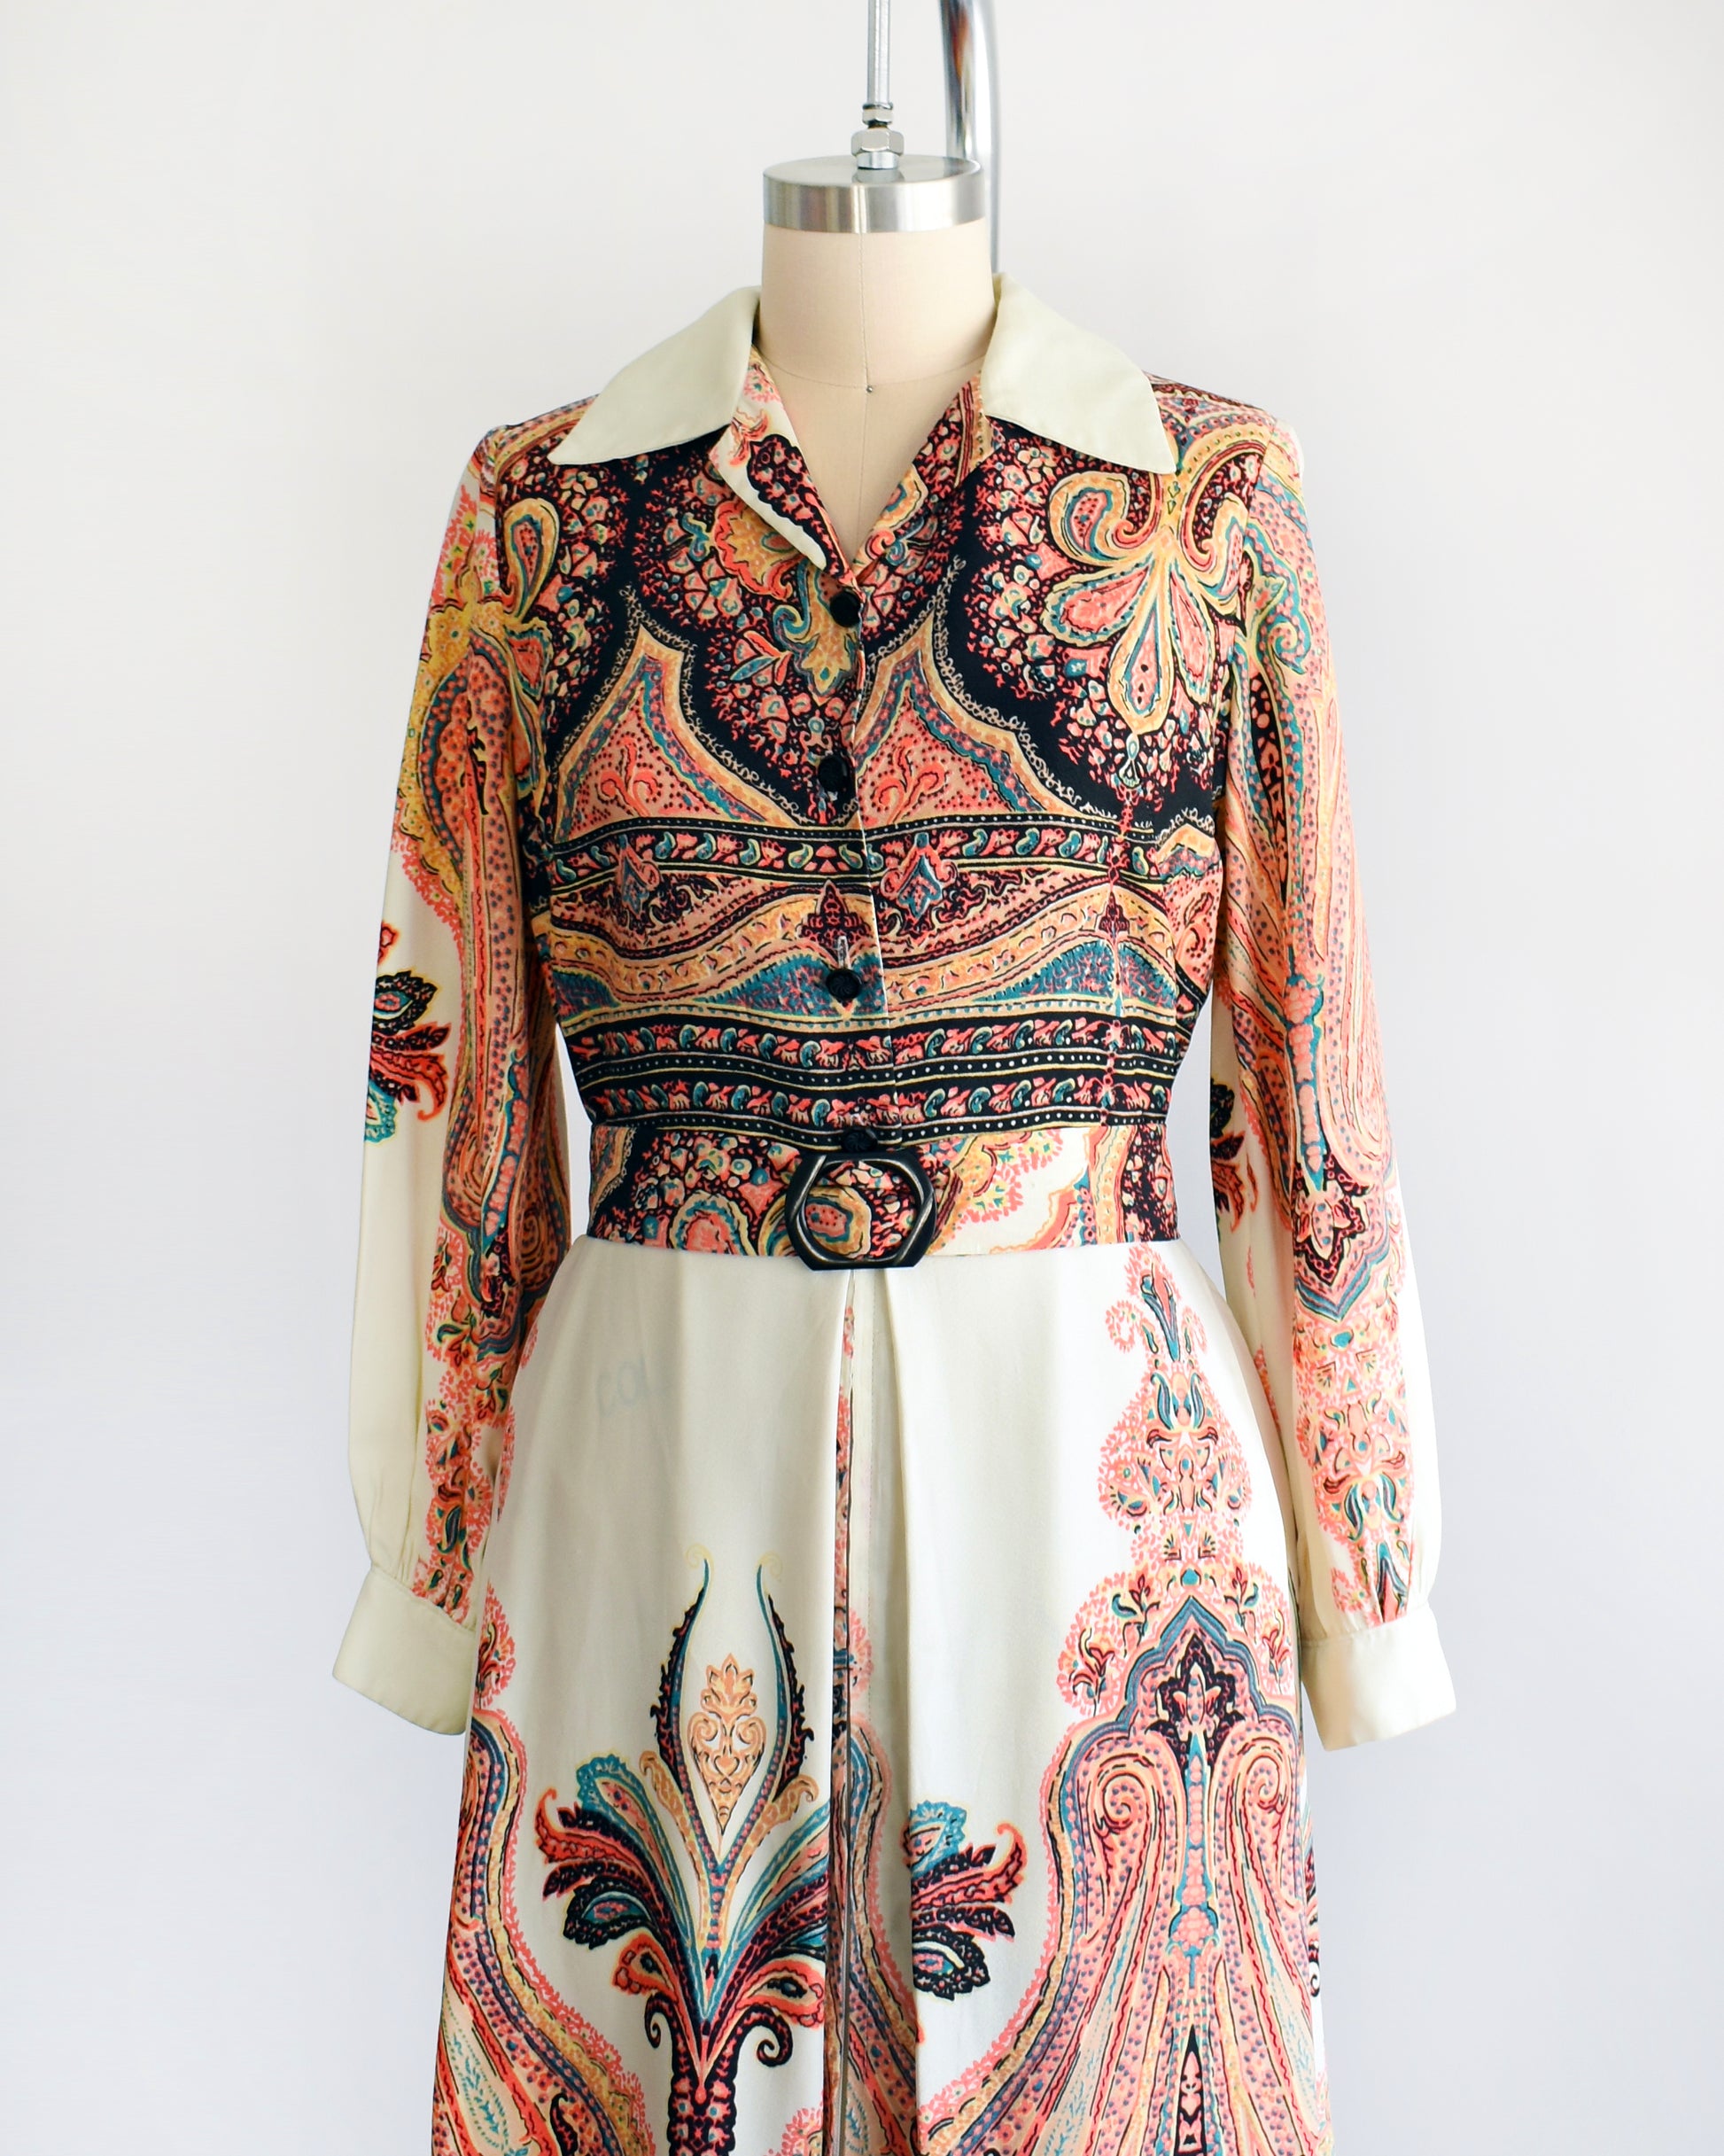 Side front view of a vintage 1970s psychedelic paisley maxi dress with button front and matching belt that has a black buckle.